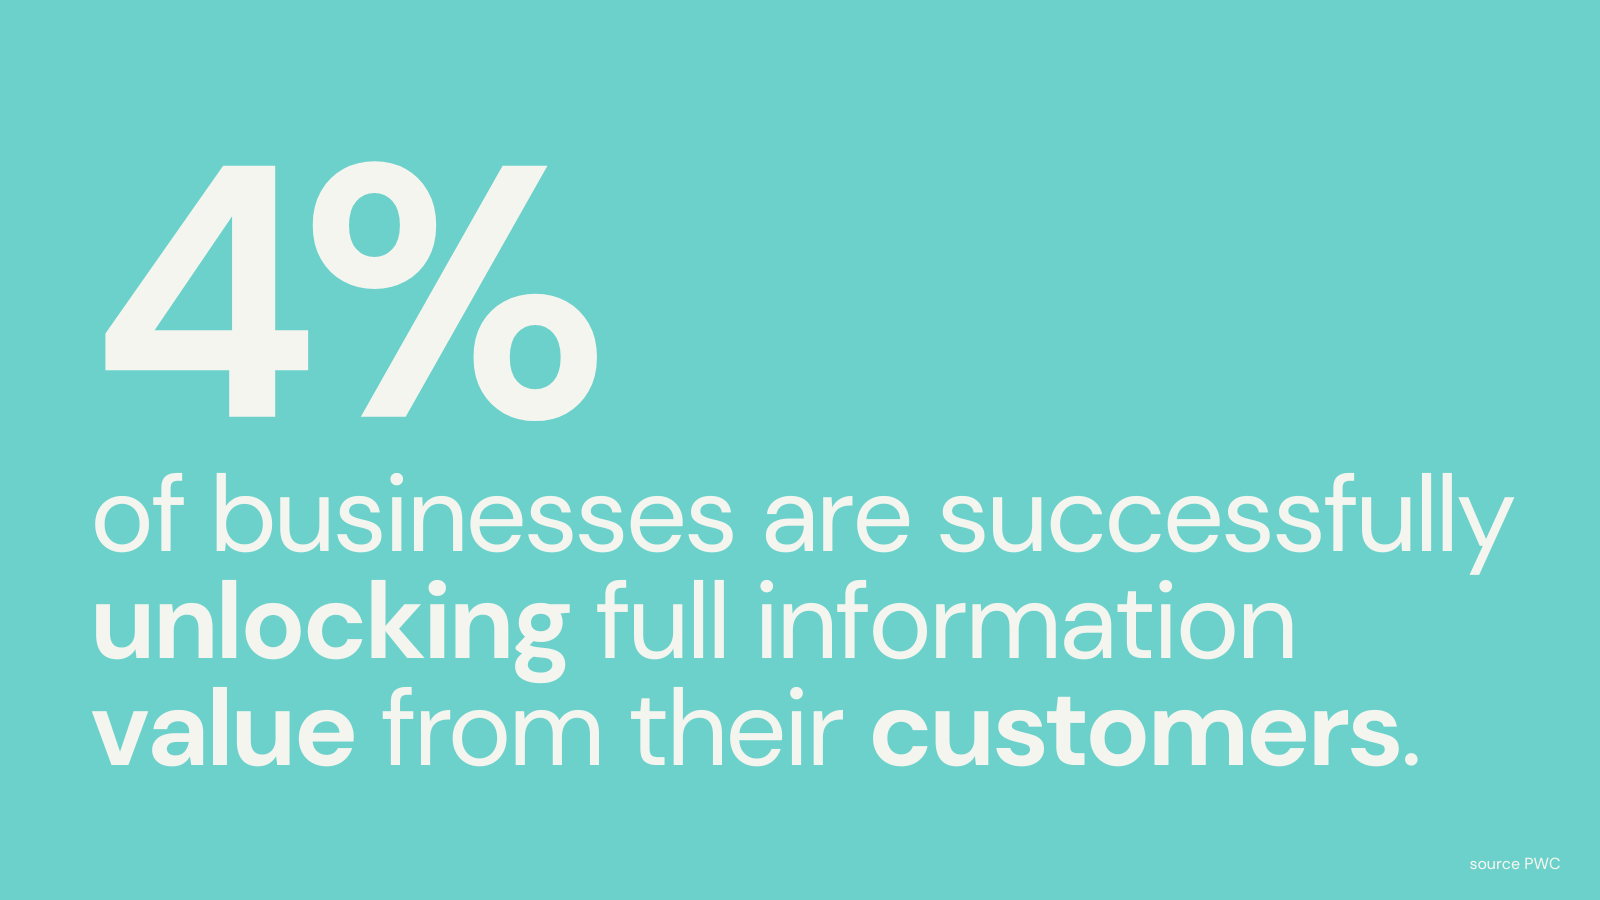 74%
of businesses are successfully

unlocking full information
value from their customers.